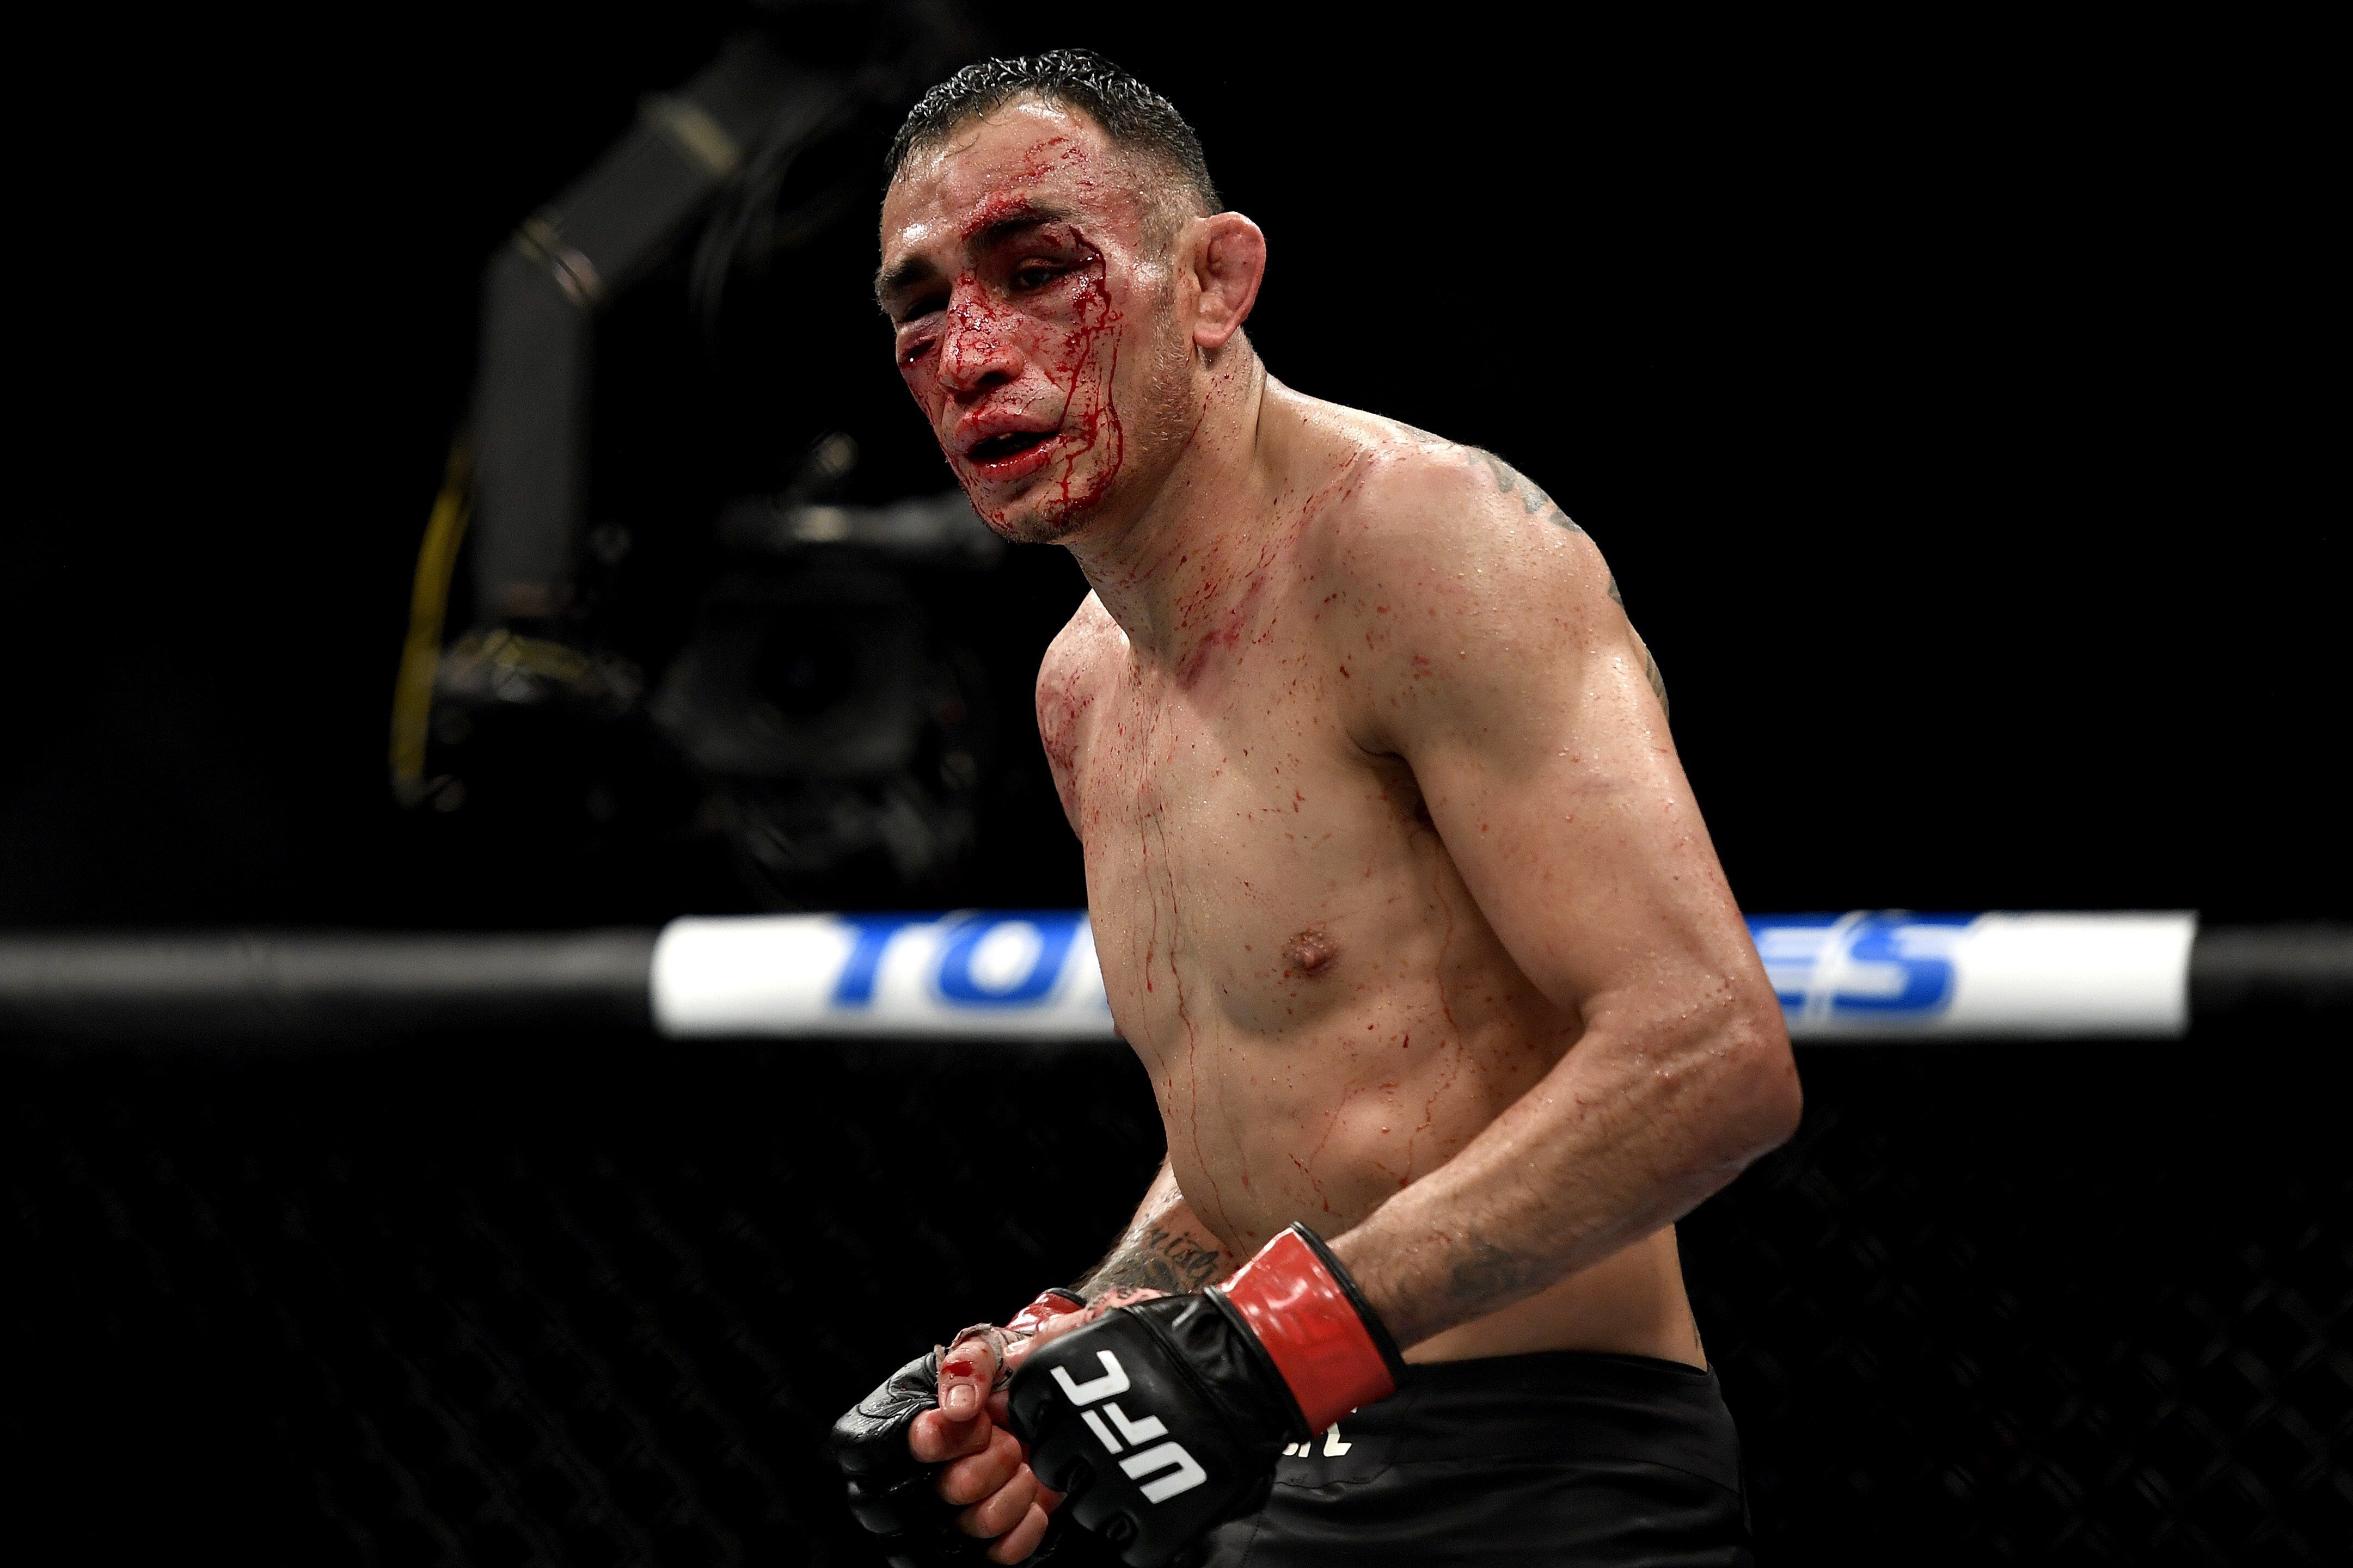 Tony Ferguson looks on after his fifth-round defeat against Justin Gaethje at UFC 249. Photo: AFP